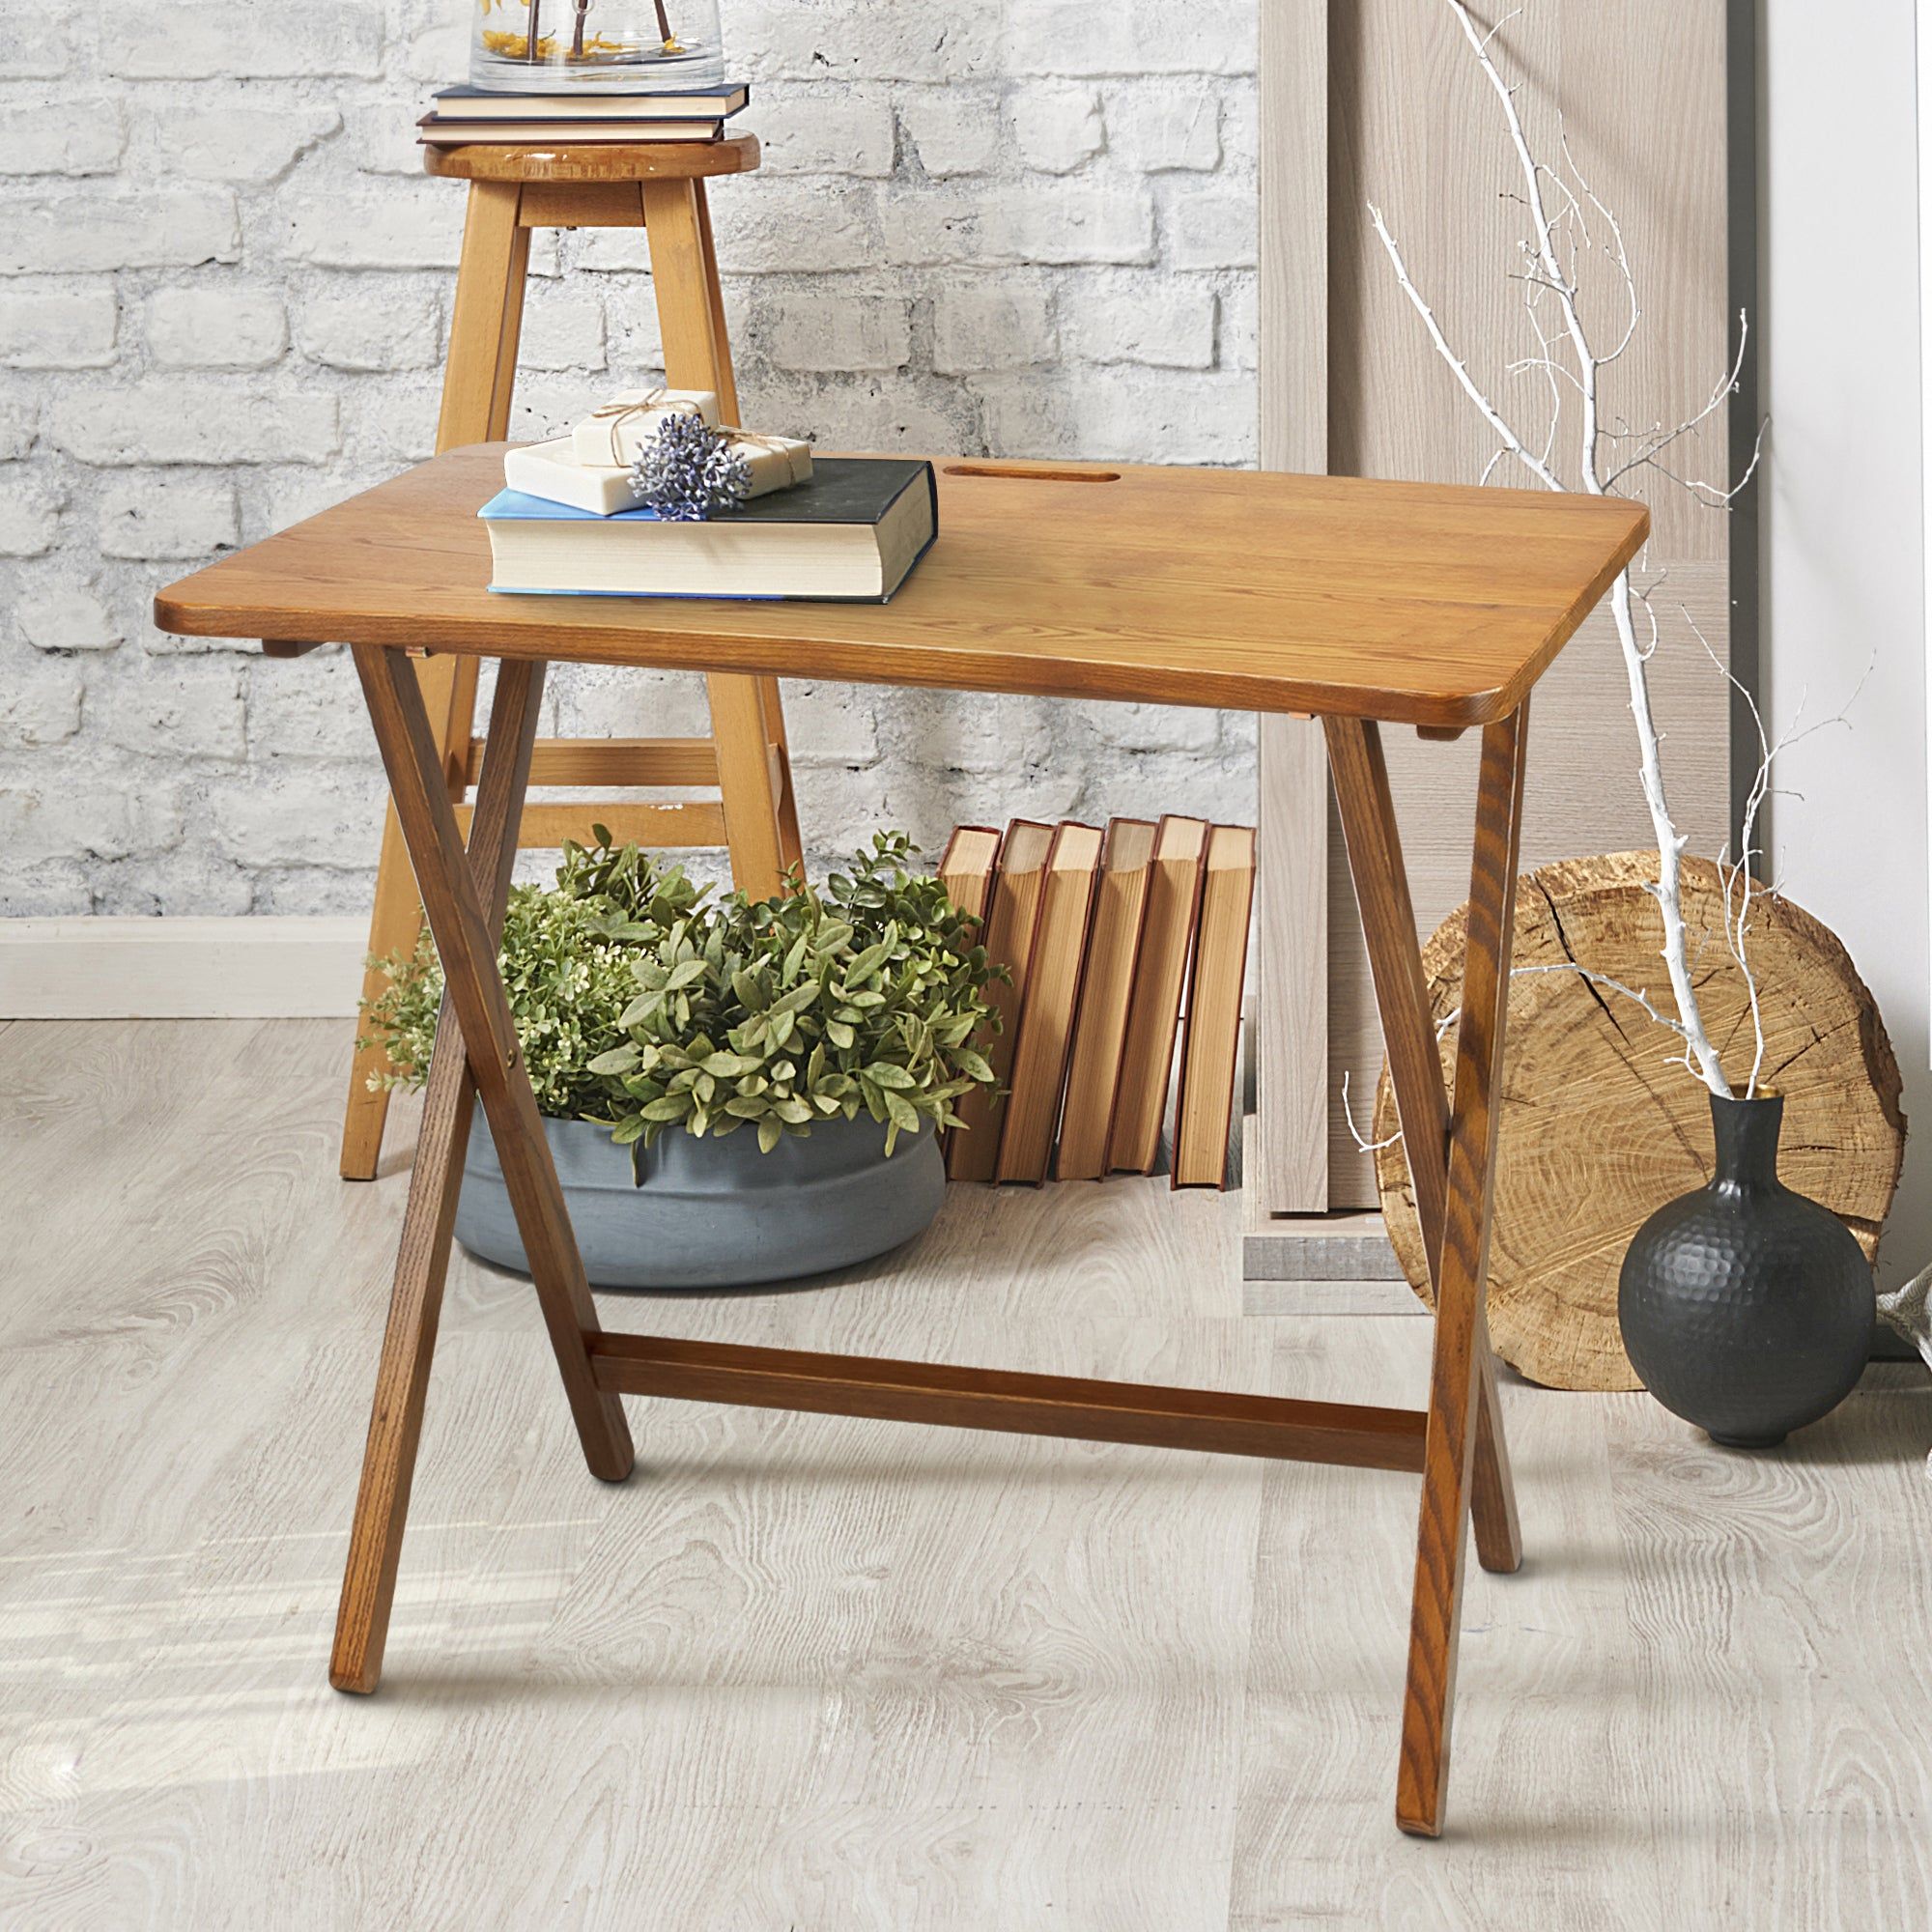 Shop Pine Canopy Goosefoot Red Oak Folding Tv Tray Table Intended For Folding Wooden Tv Tray Tables (Photo 1 of 15)